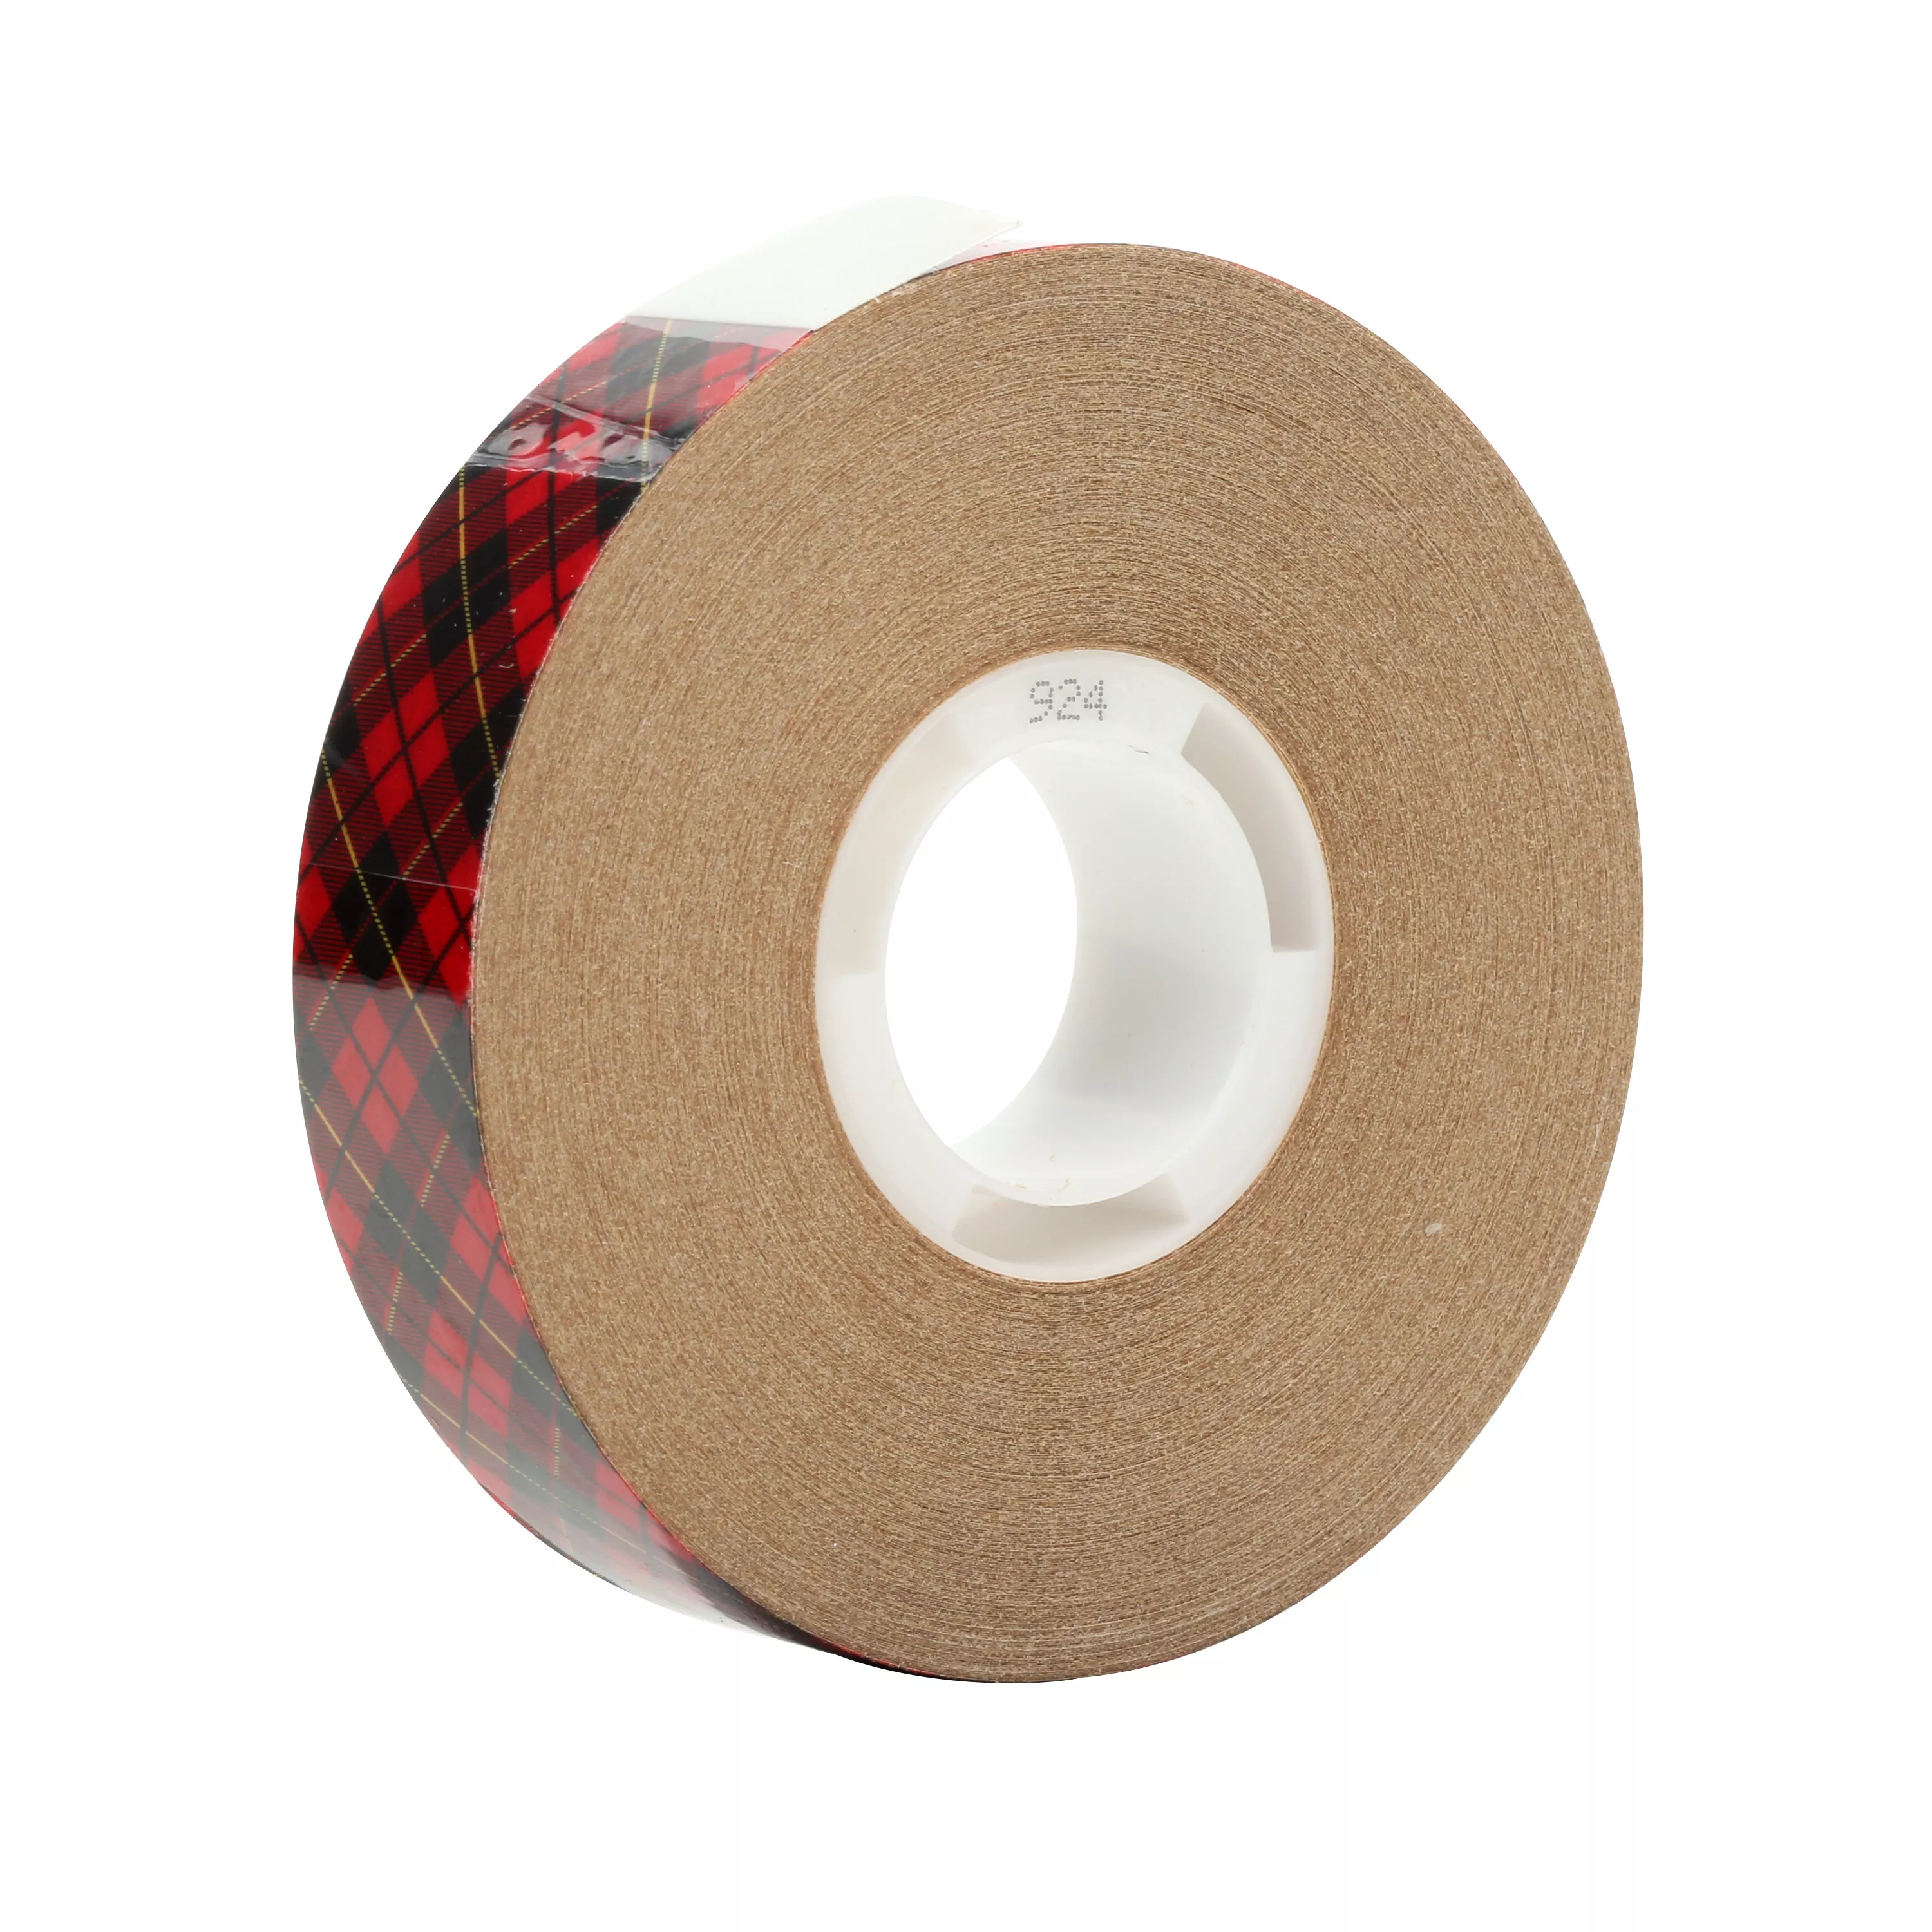 Scotch® ATG Adhesive Transfer Tape 924, Clear, 3/4 in x 36 yd, 2 mil, 48
Roll/Case